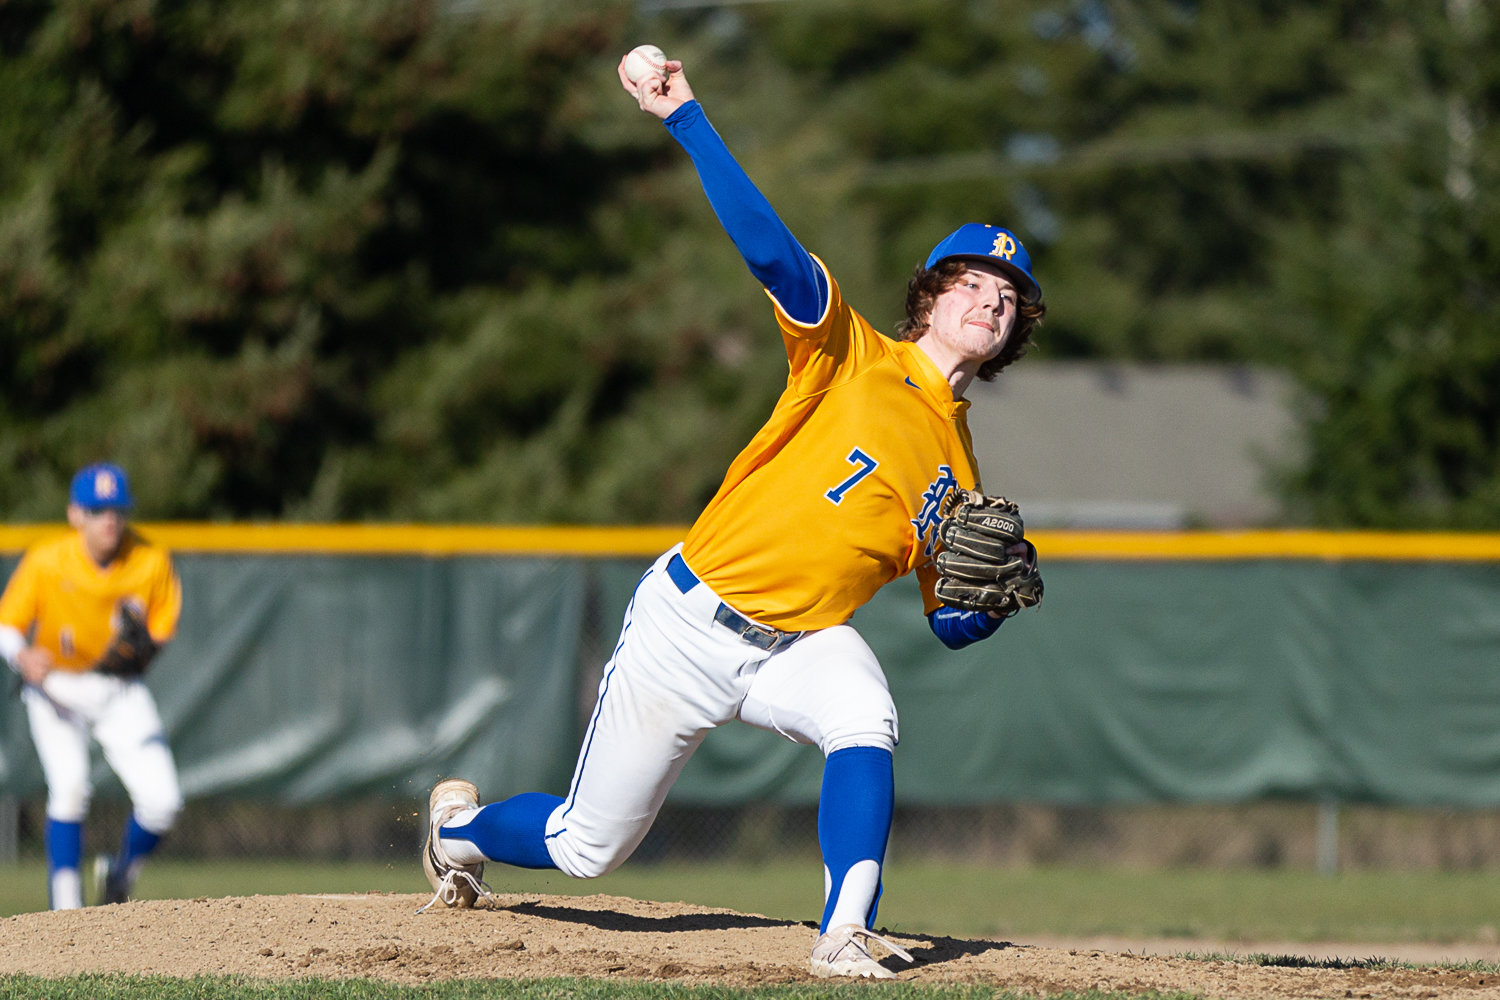 Rochester pitcher Braden Hartley tosses a pitch against W.F. West at Heinz-Rotter Field March 21.